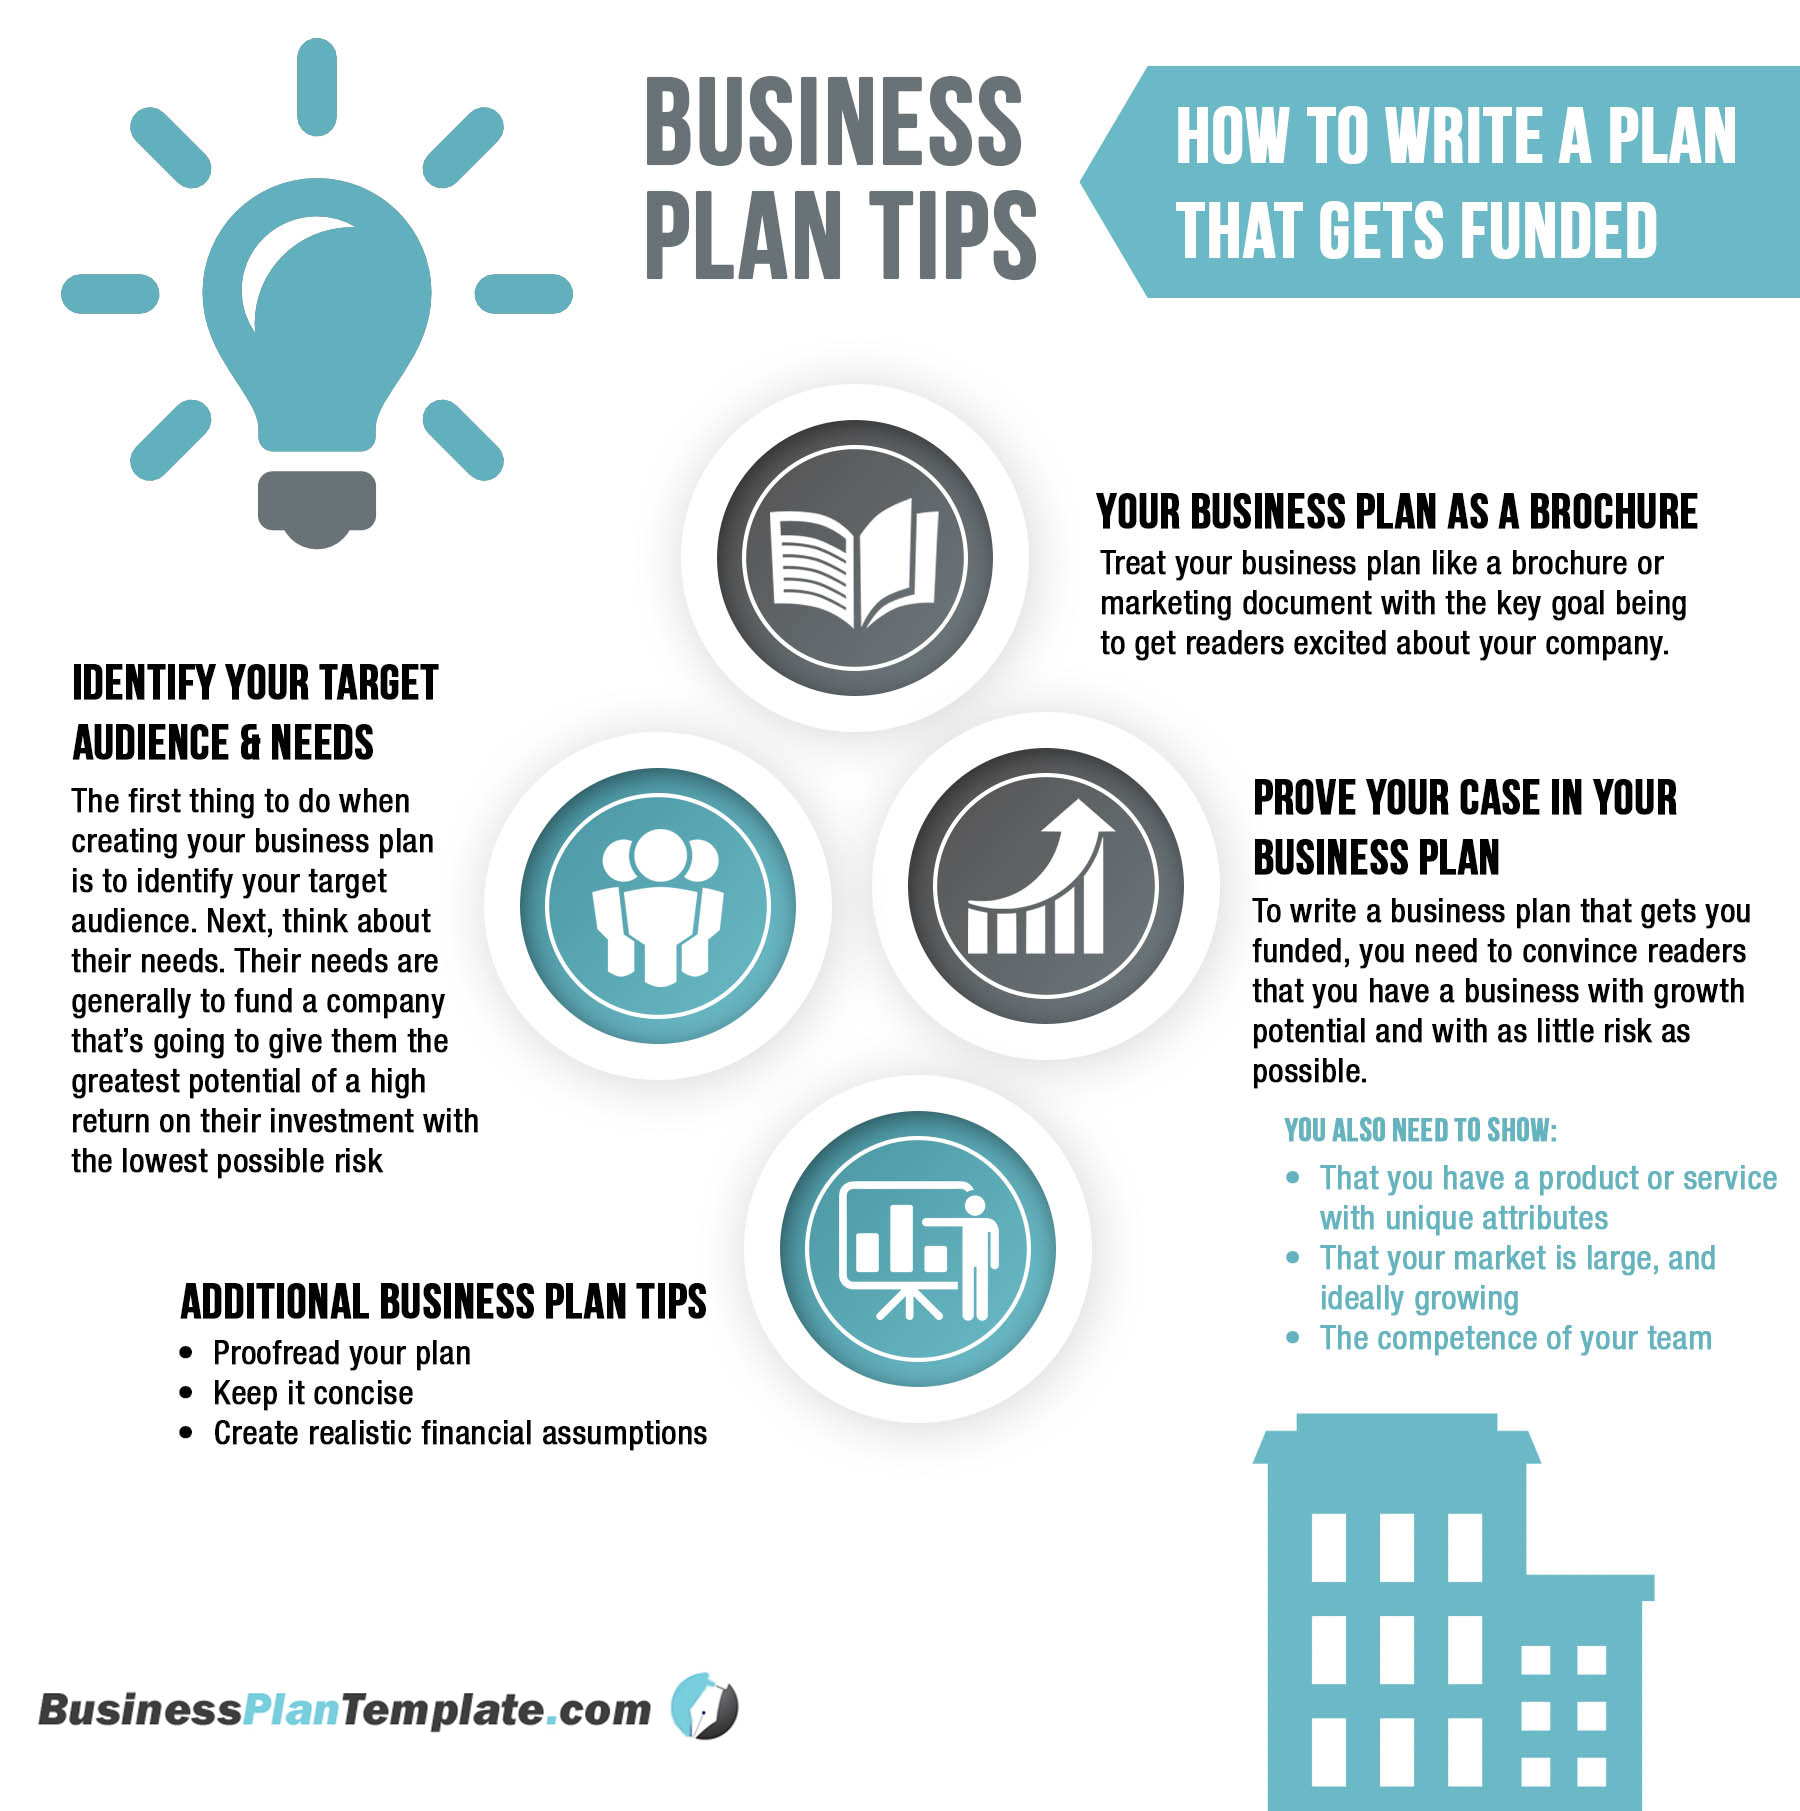 Business Plan Writing Services: Who’s The Best?